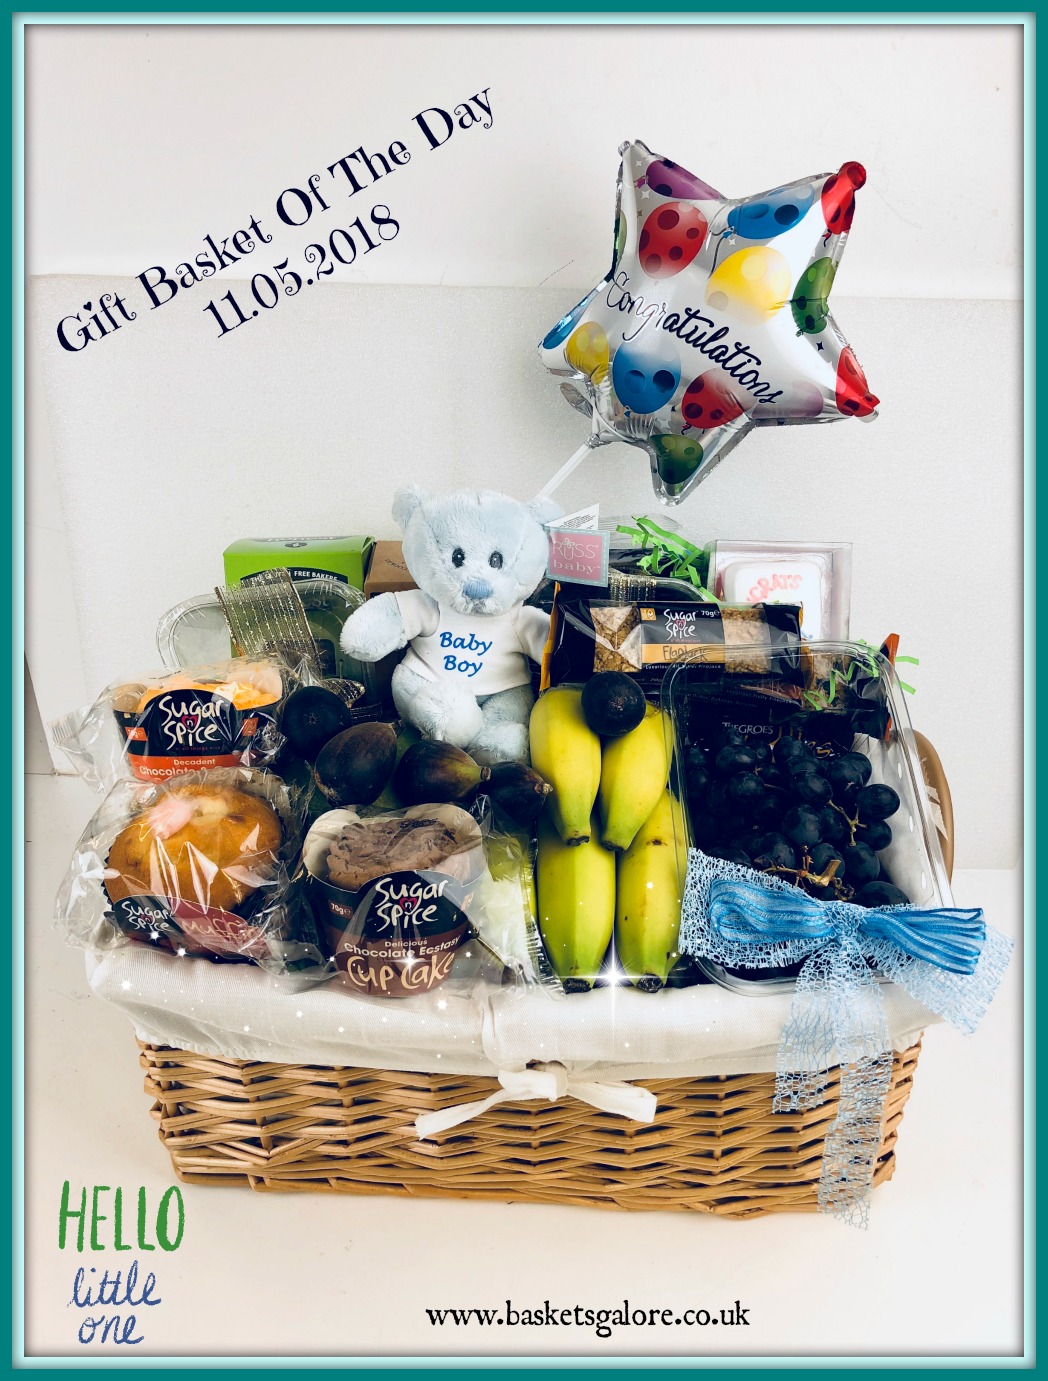 Baskets Galore’s Customer Gifts – Gift Basket of the Day 11.05.18